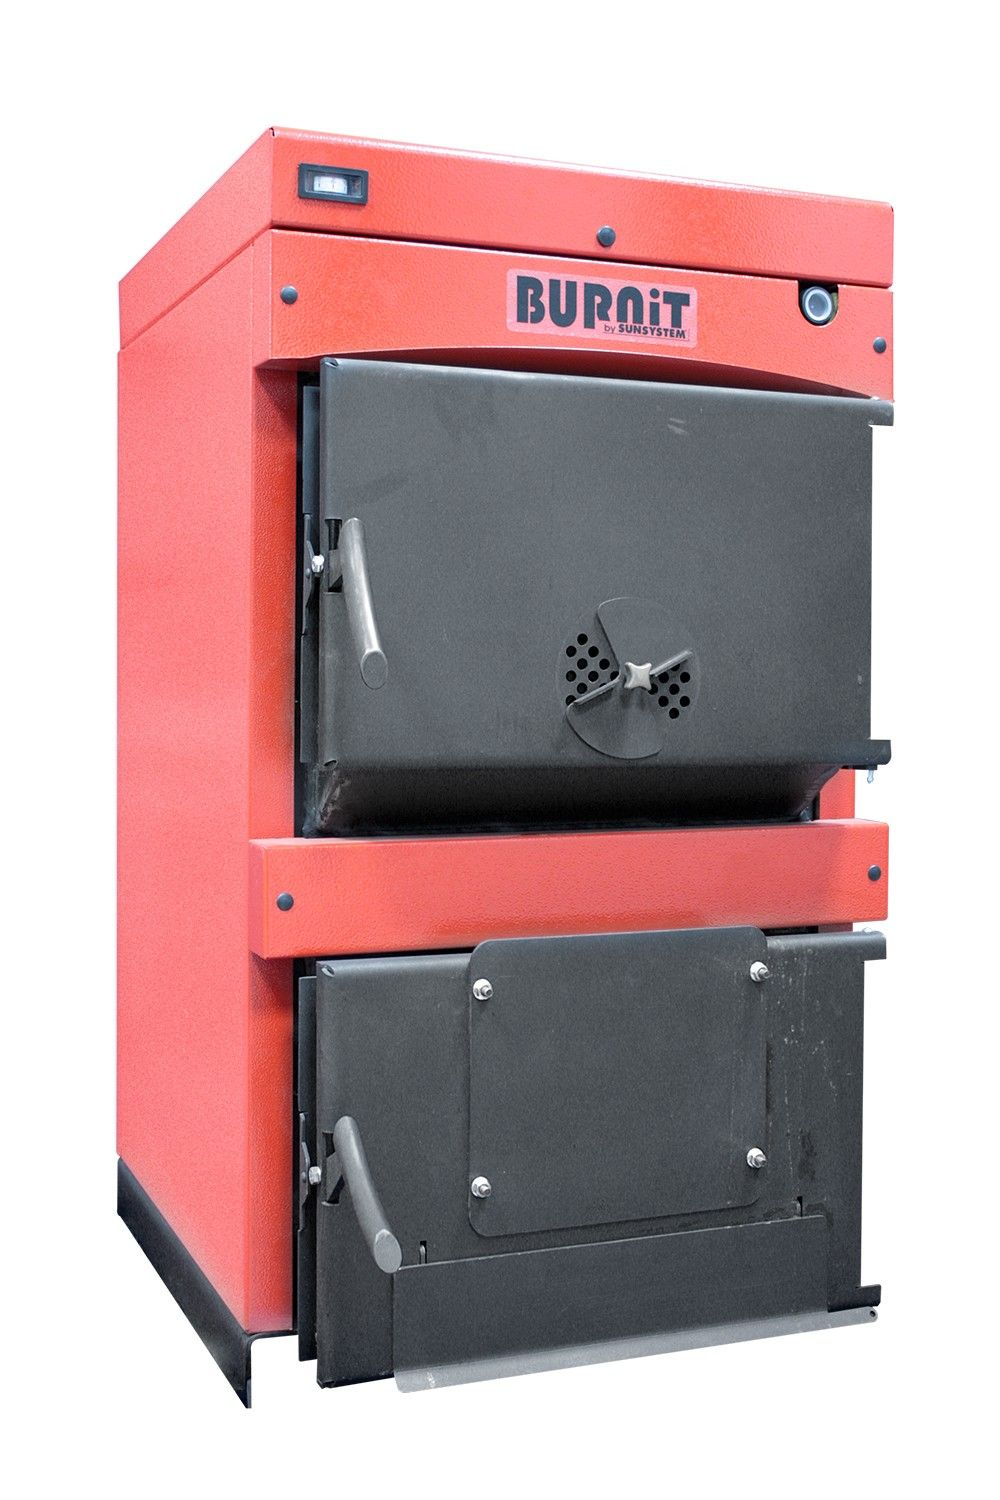 BURNiT WBS 50 kW solid fuel boiler